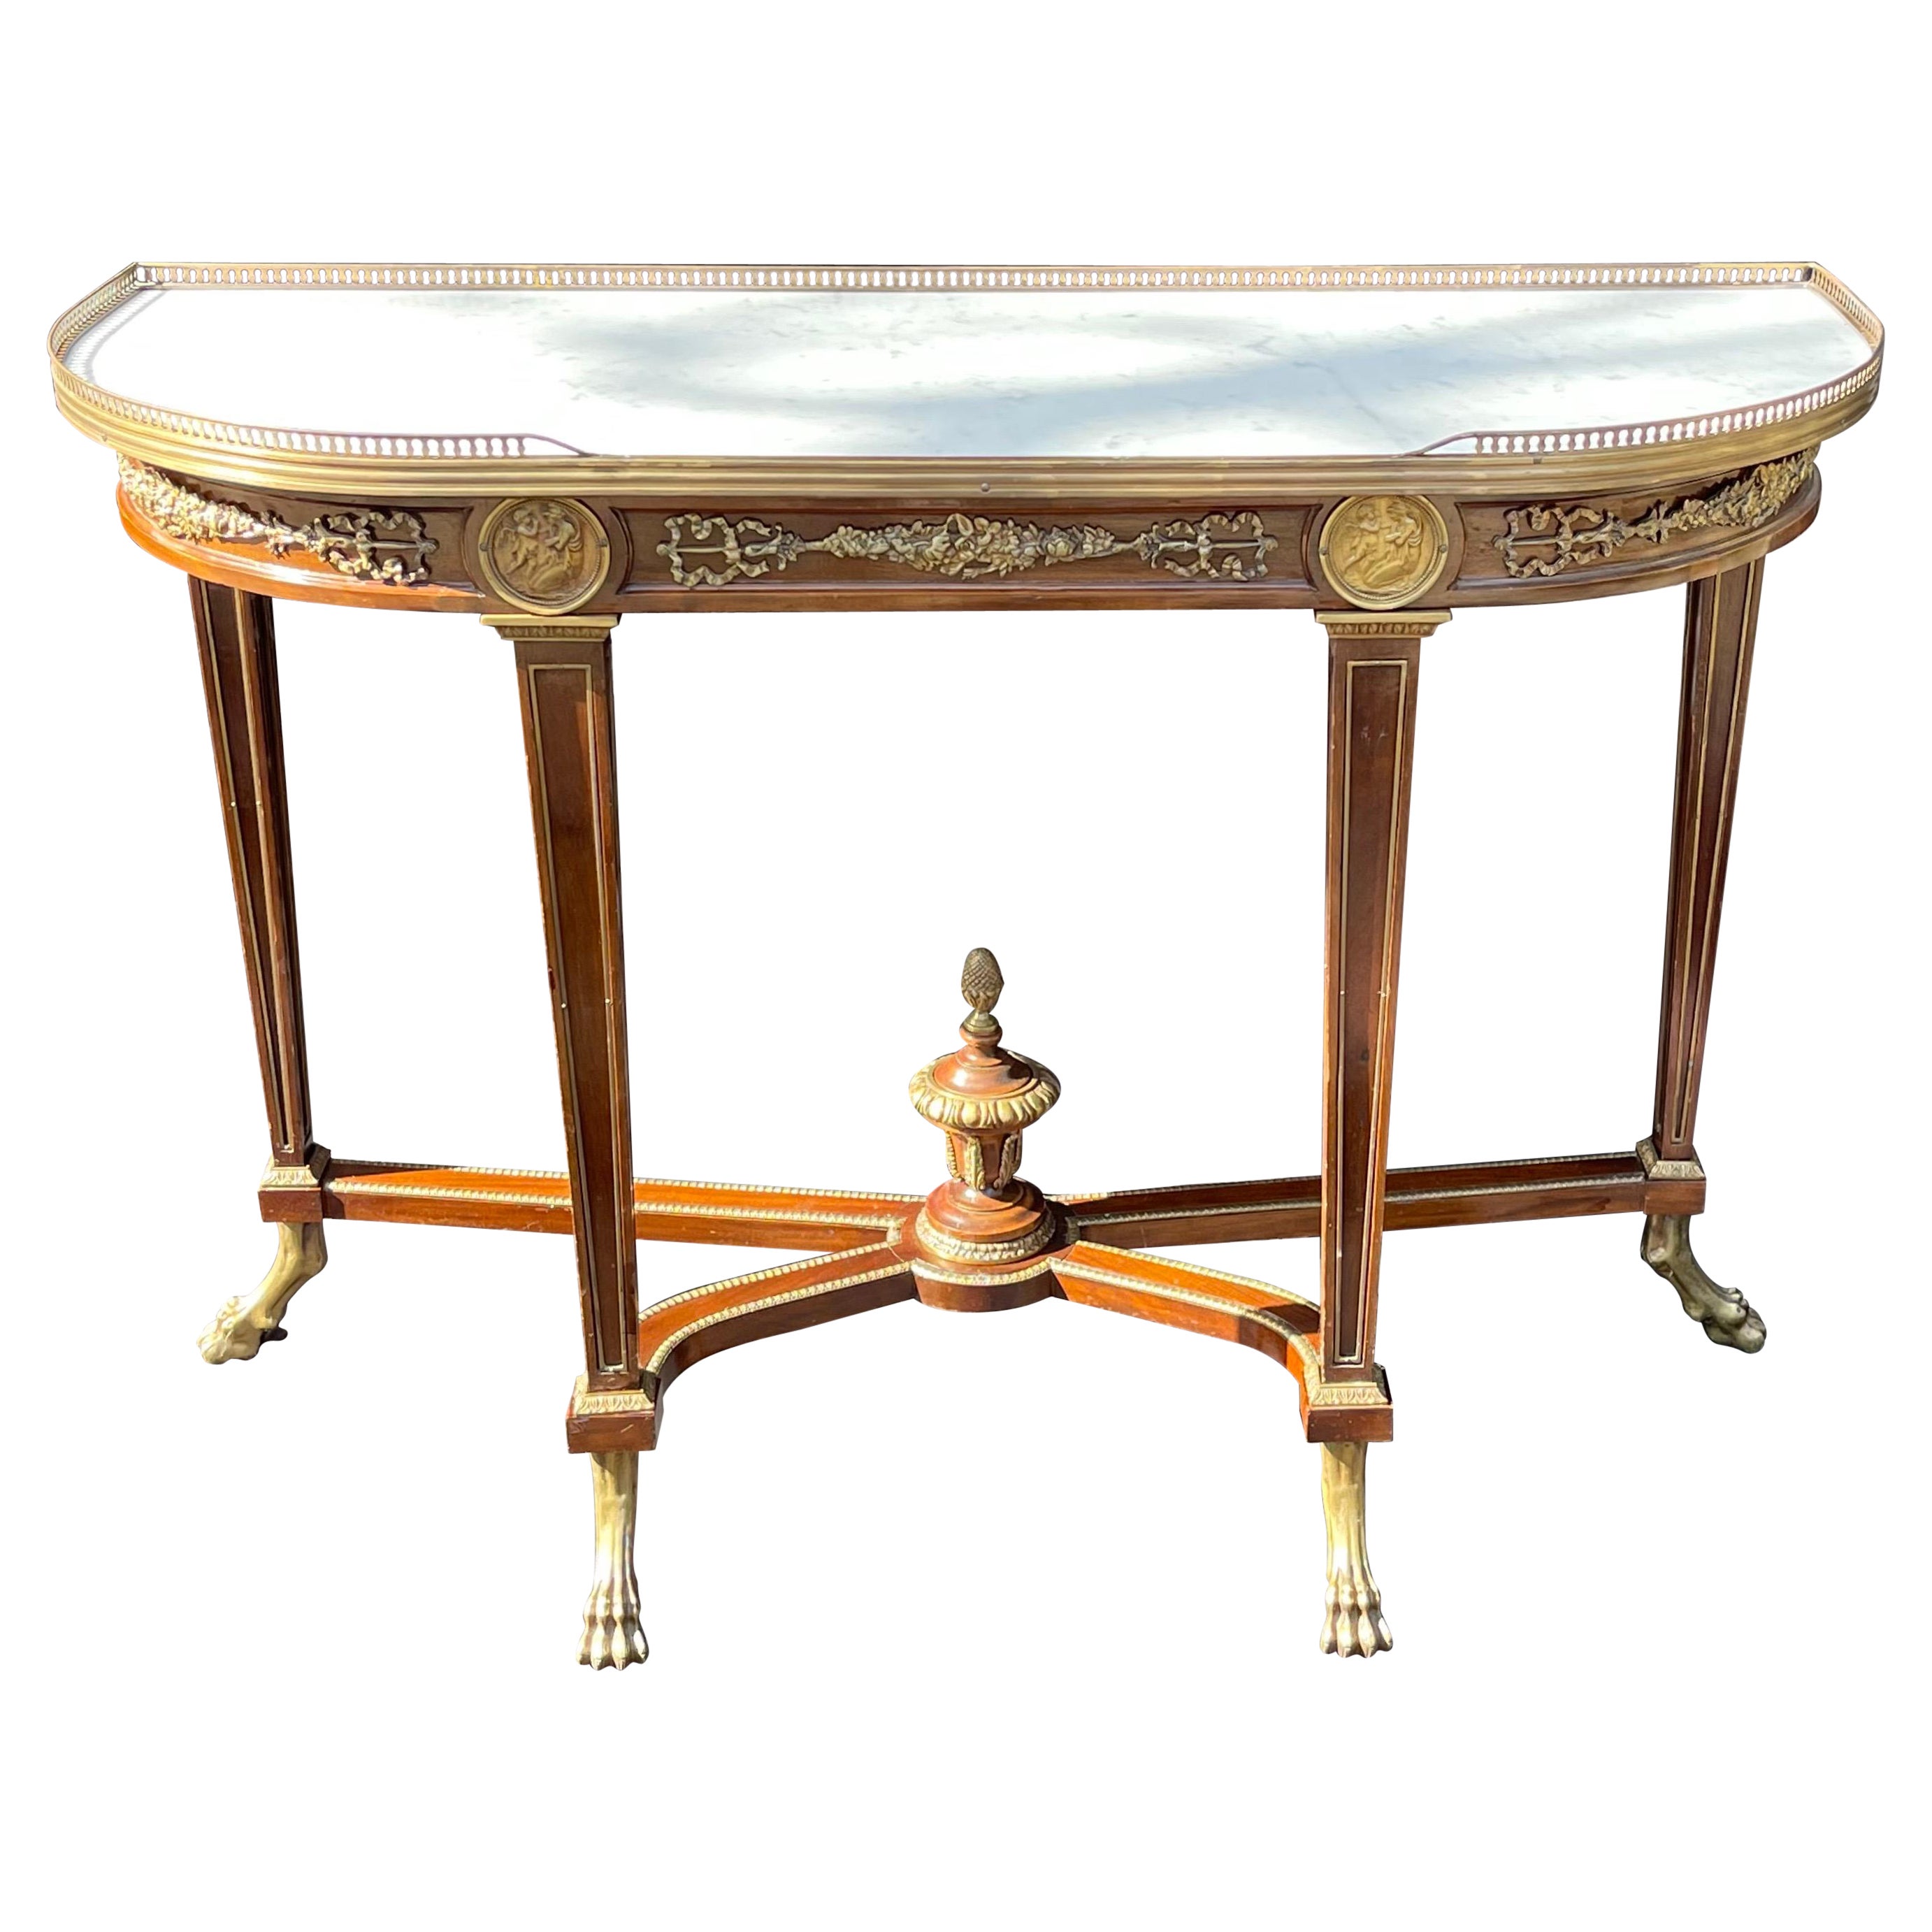 Wonderful French Empire Neoclassical Ormolu Mounted Marble Top Console Table